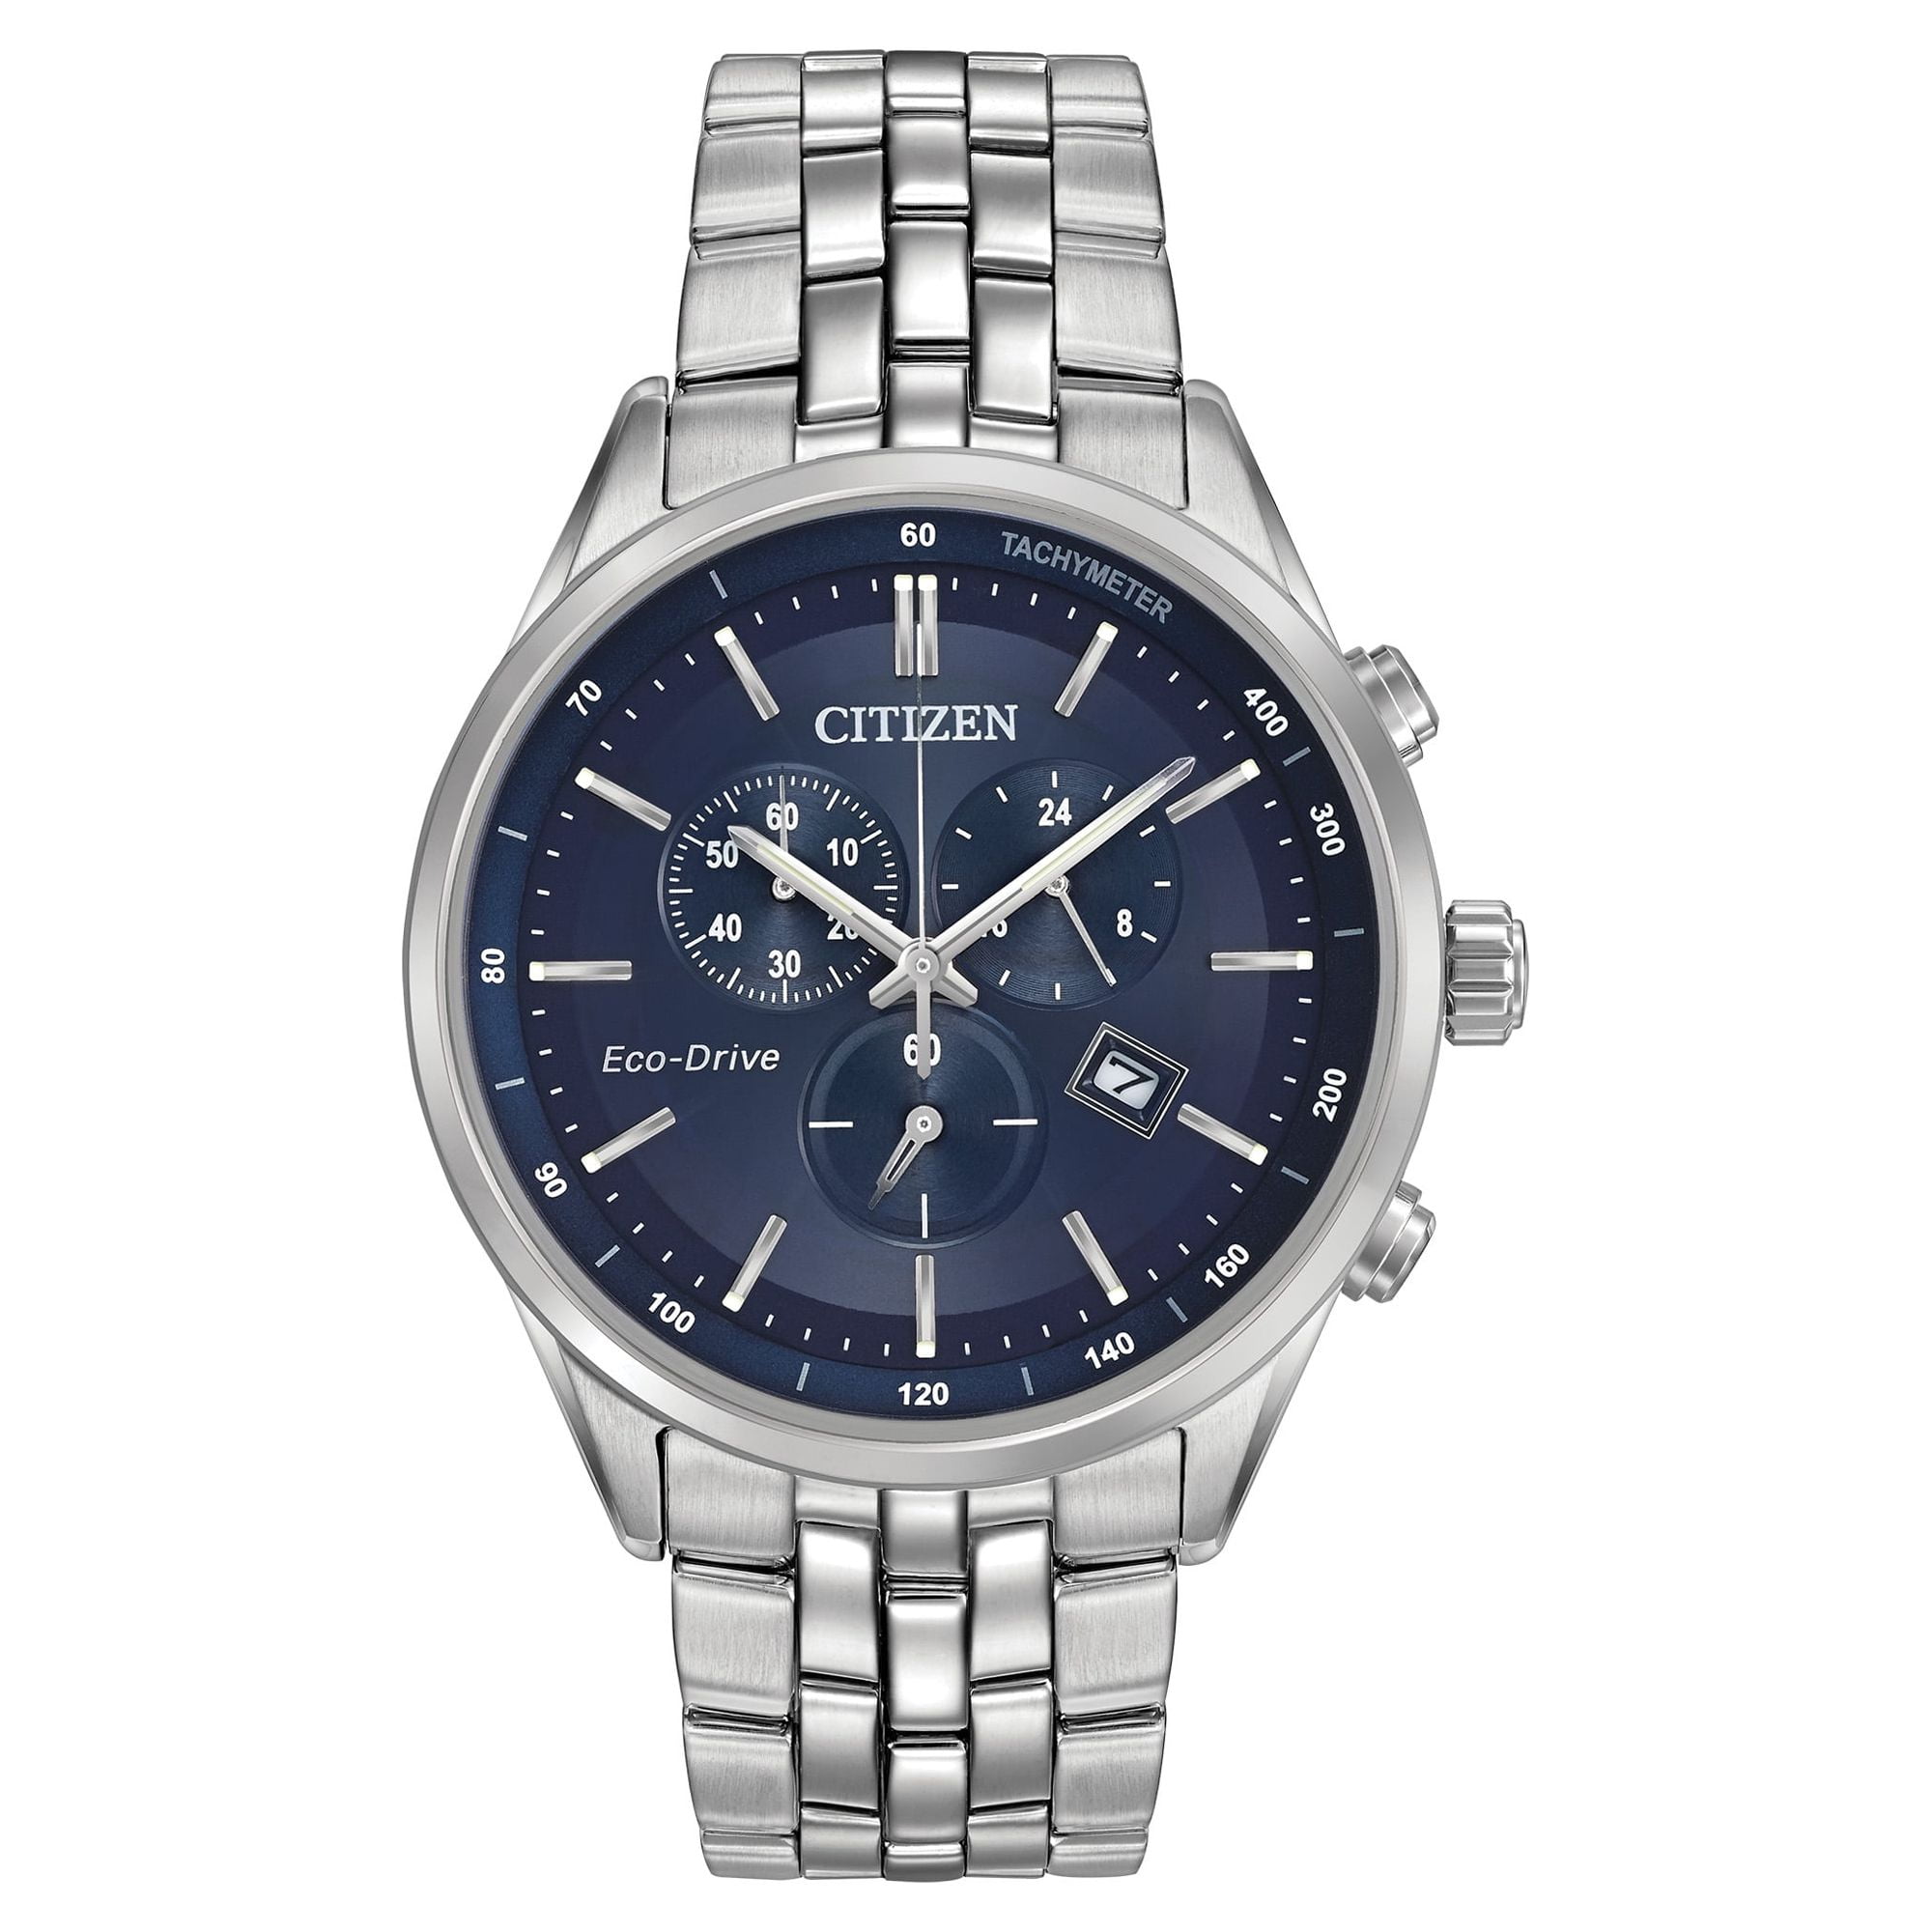 Citizen Men's Eco-Drive Chronograph Stainless Steel Watch AT2141-52L